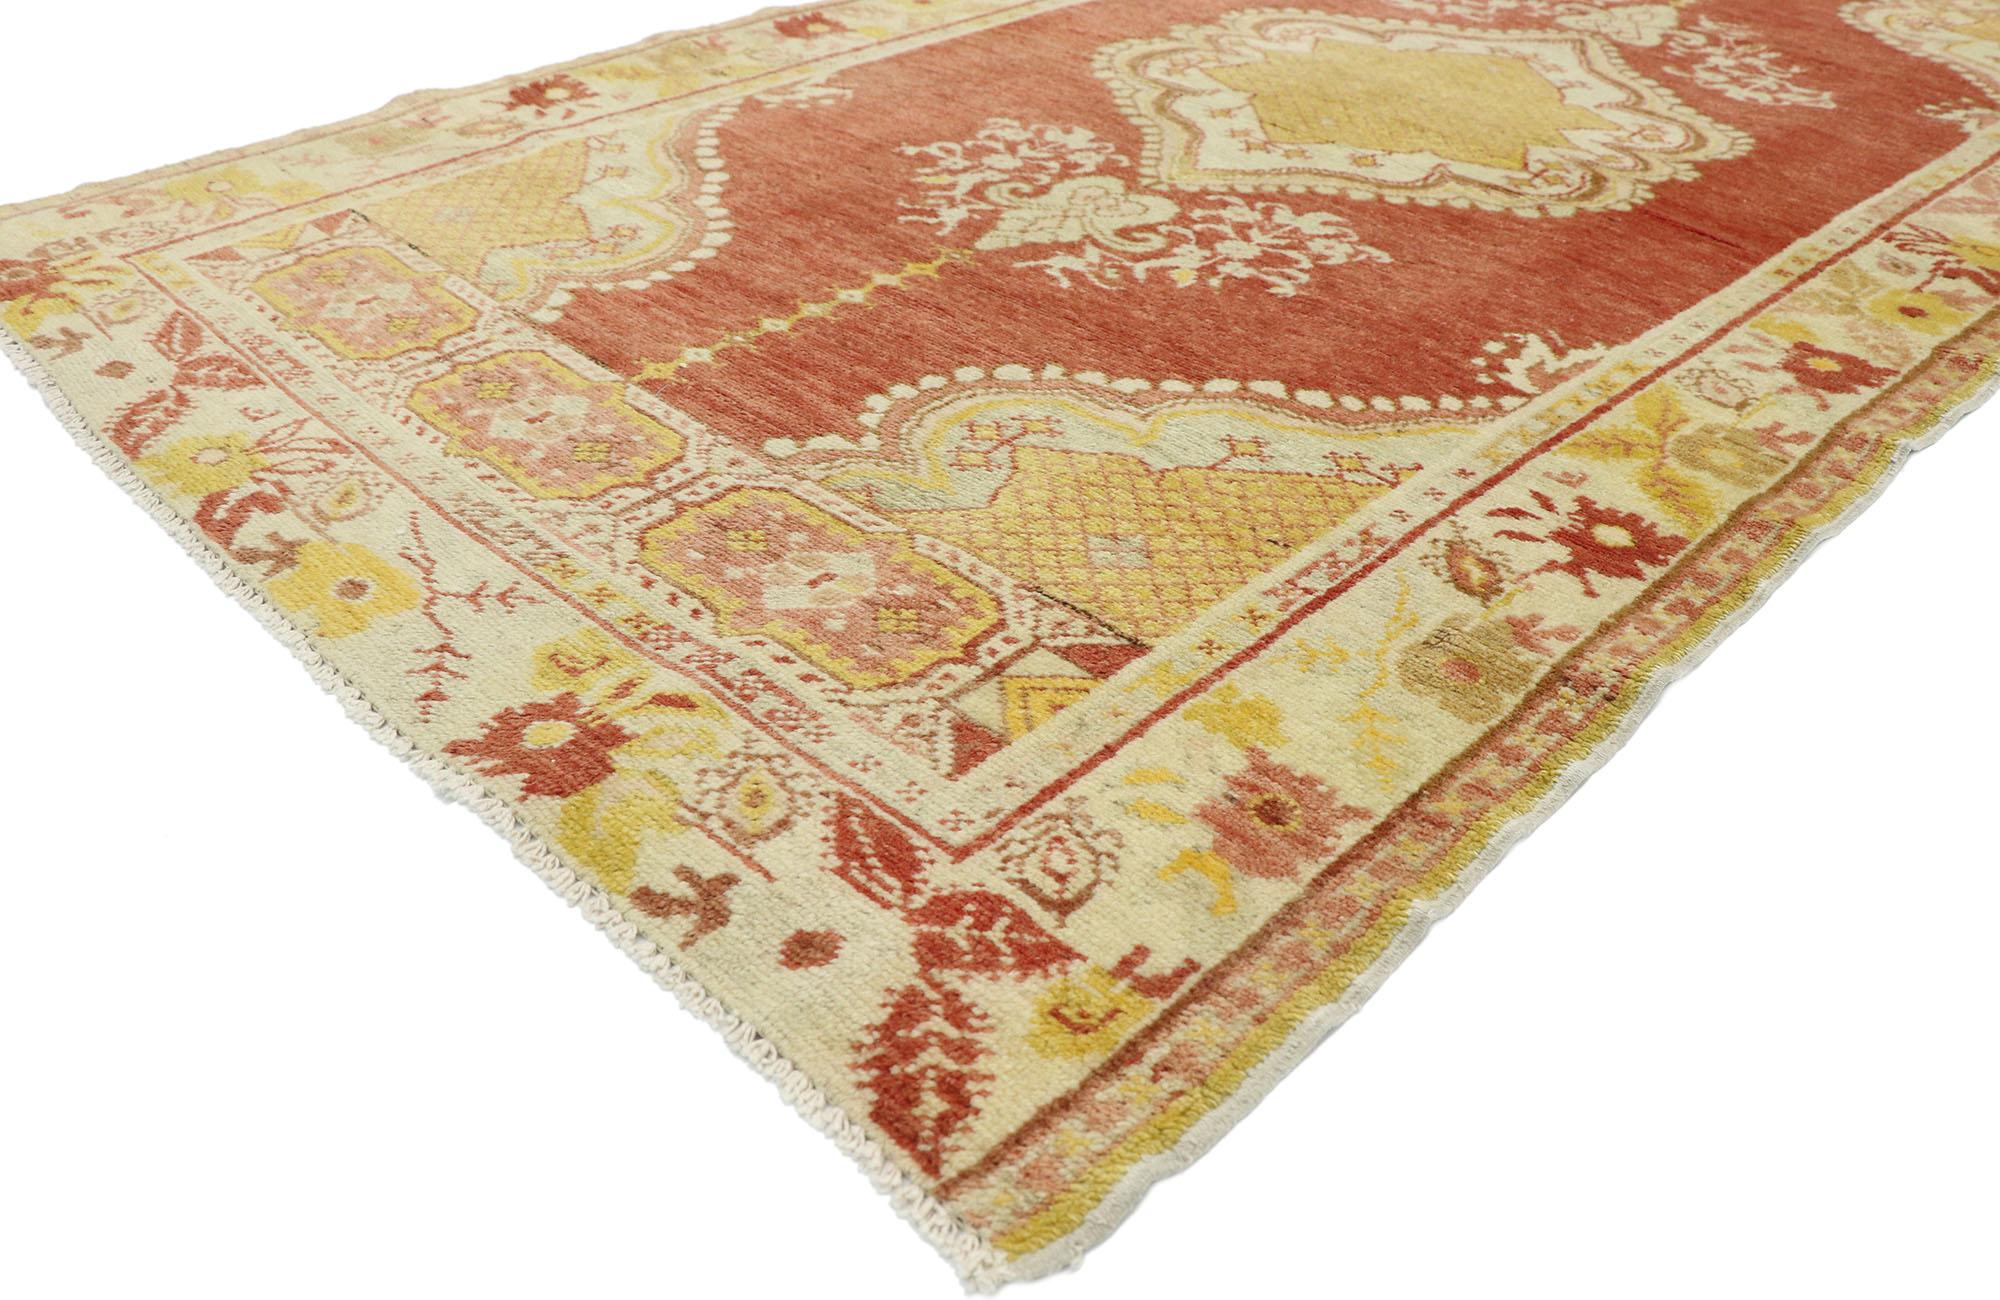 52702, Vintage Turkish Oushak Rug with French Provincial and Rococo Style 03'08 x 06'07. French Provincial and Rococo Romanticism meets timeless Anatolian tradition in this hand knotted wool vintage Turkish Oushak rug. It features a large polygonal